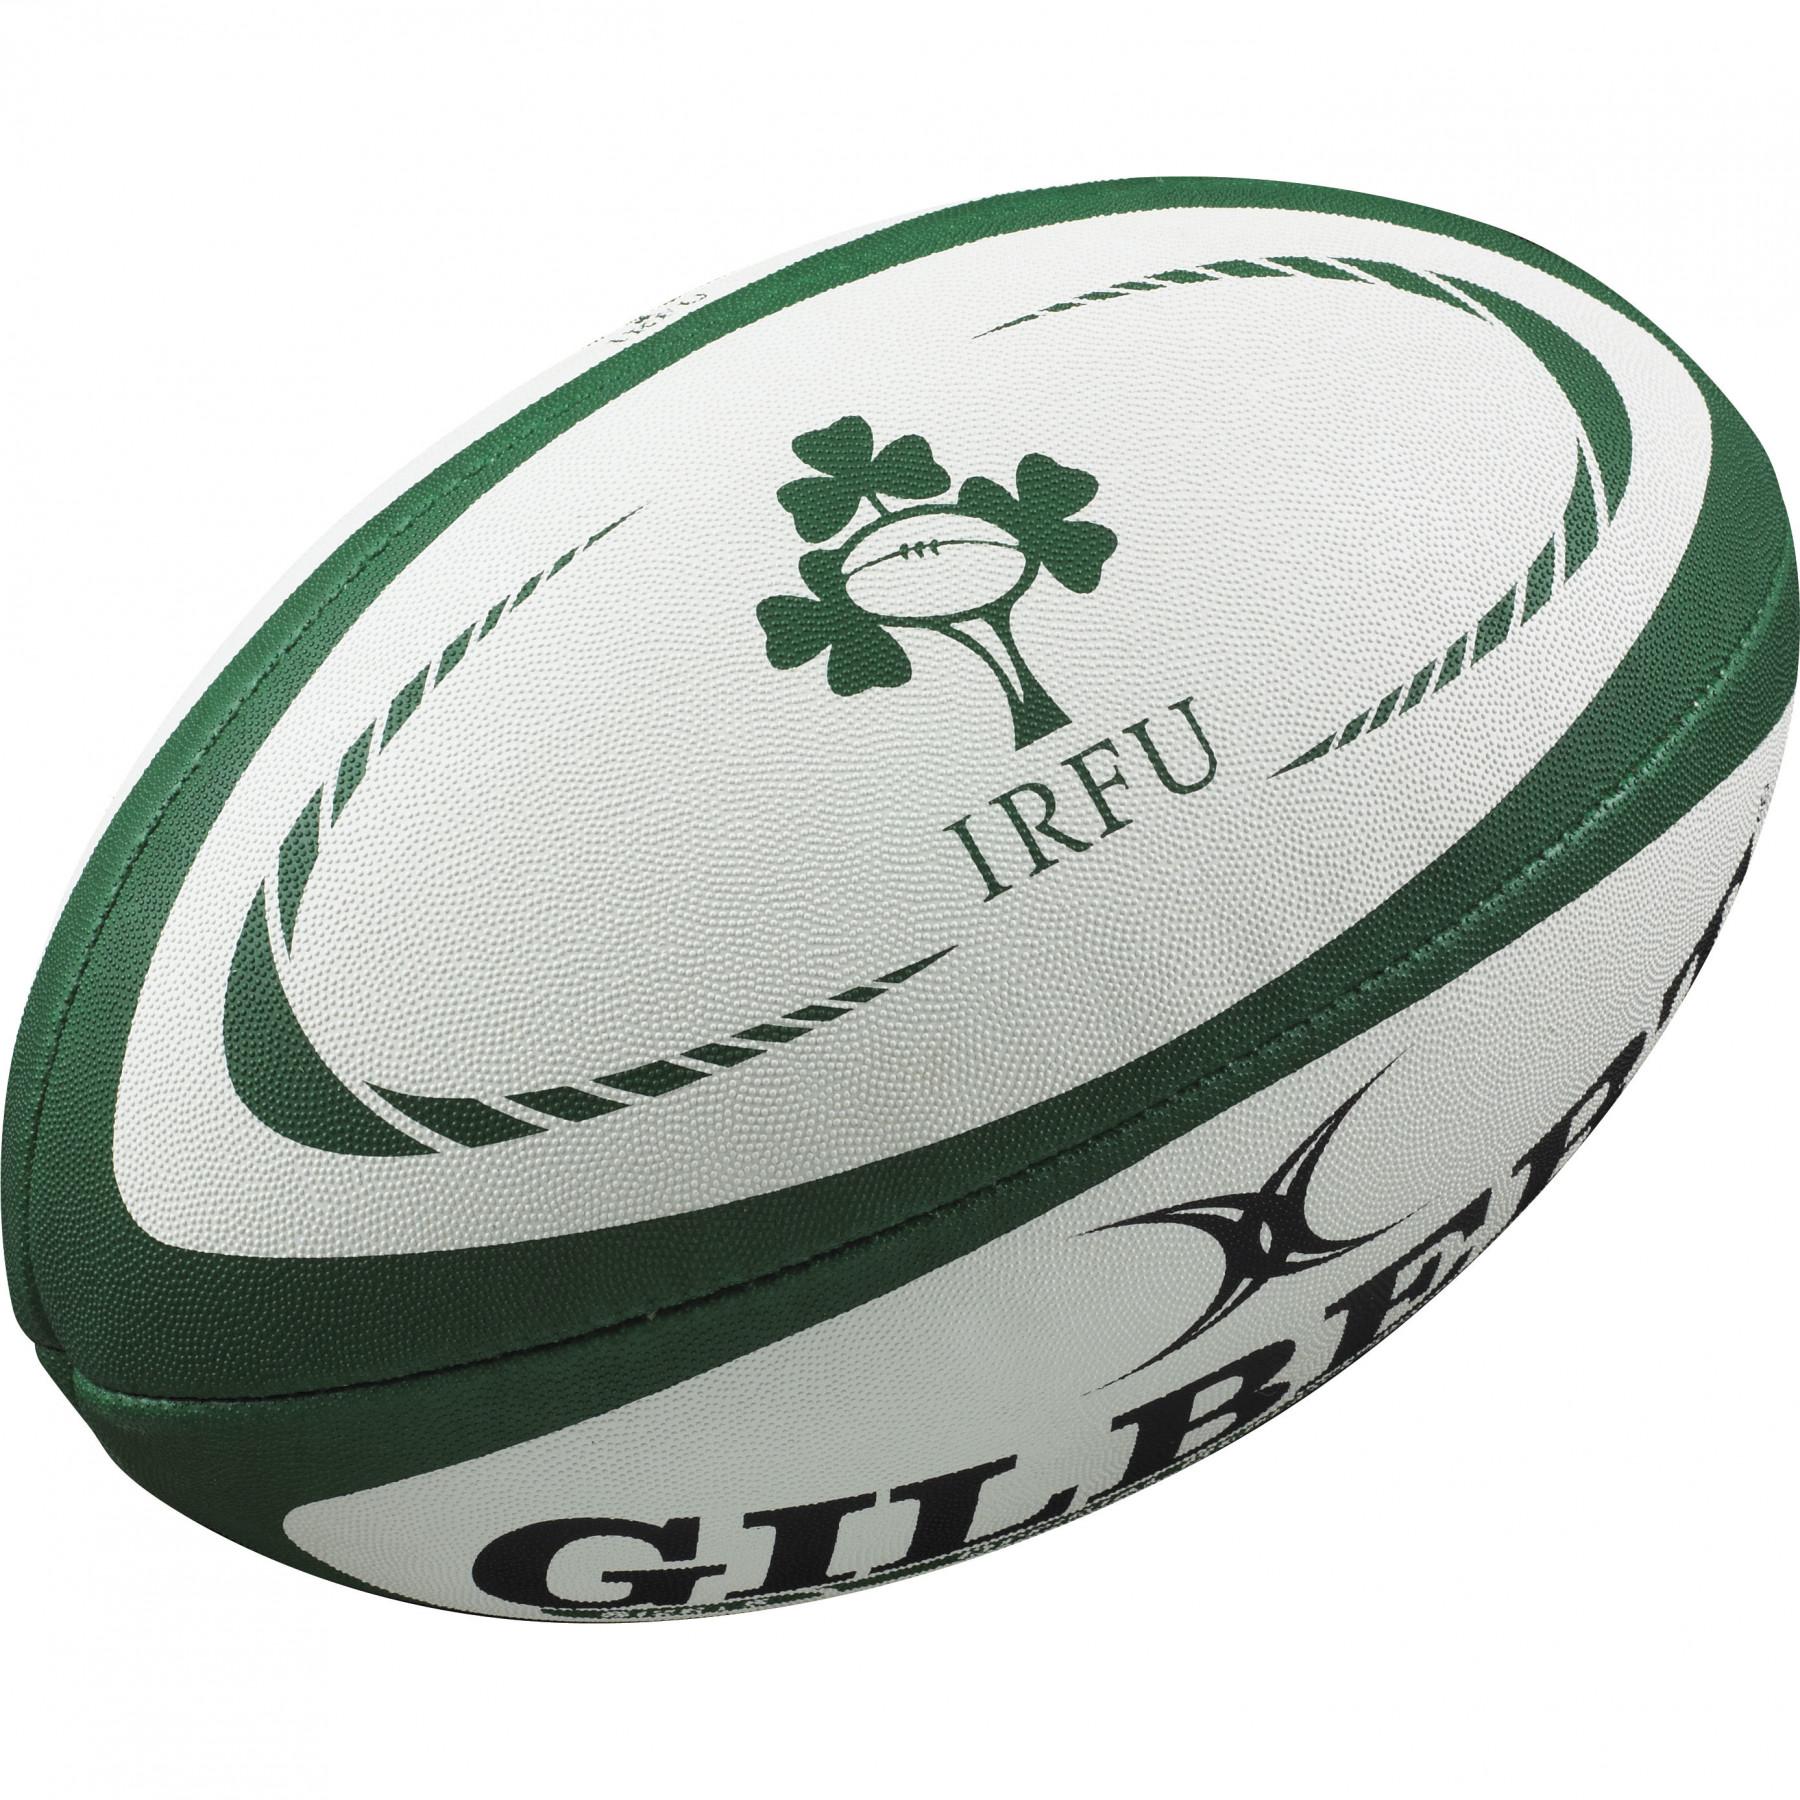 Rugbybal Midi Replica Gilbert Ierland (Taille 2)